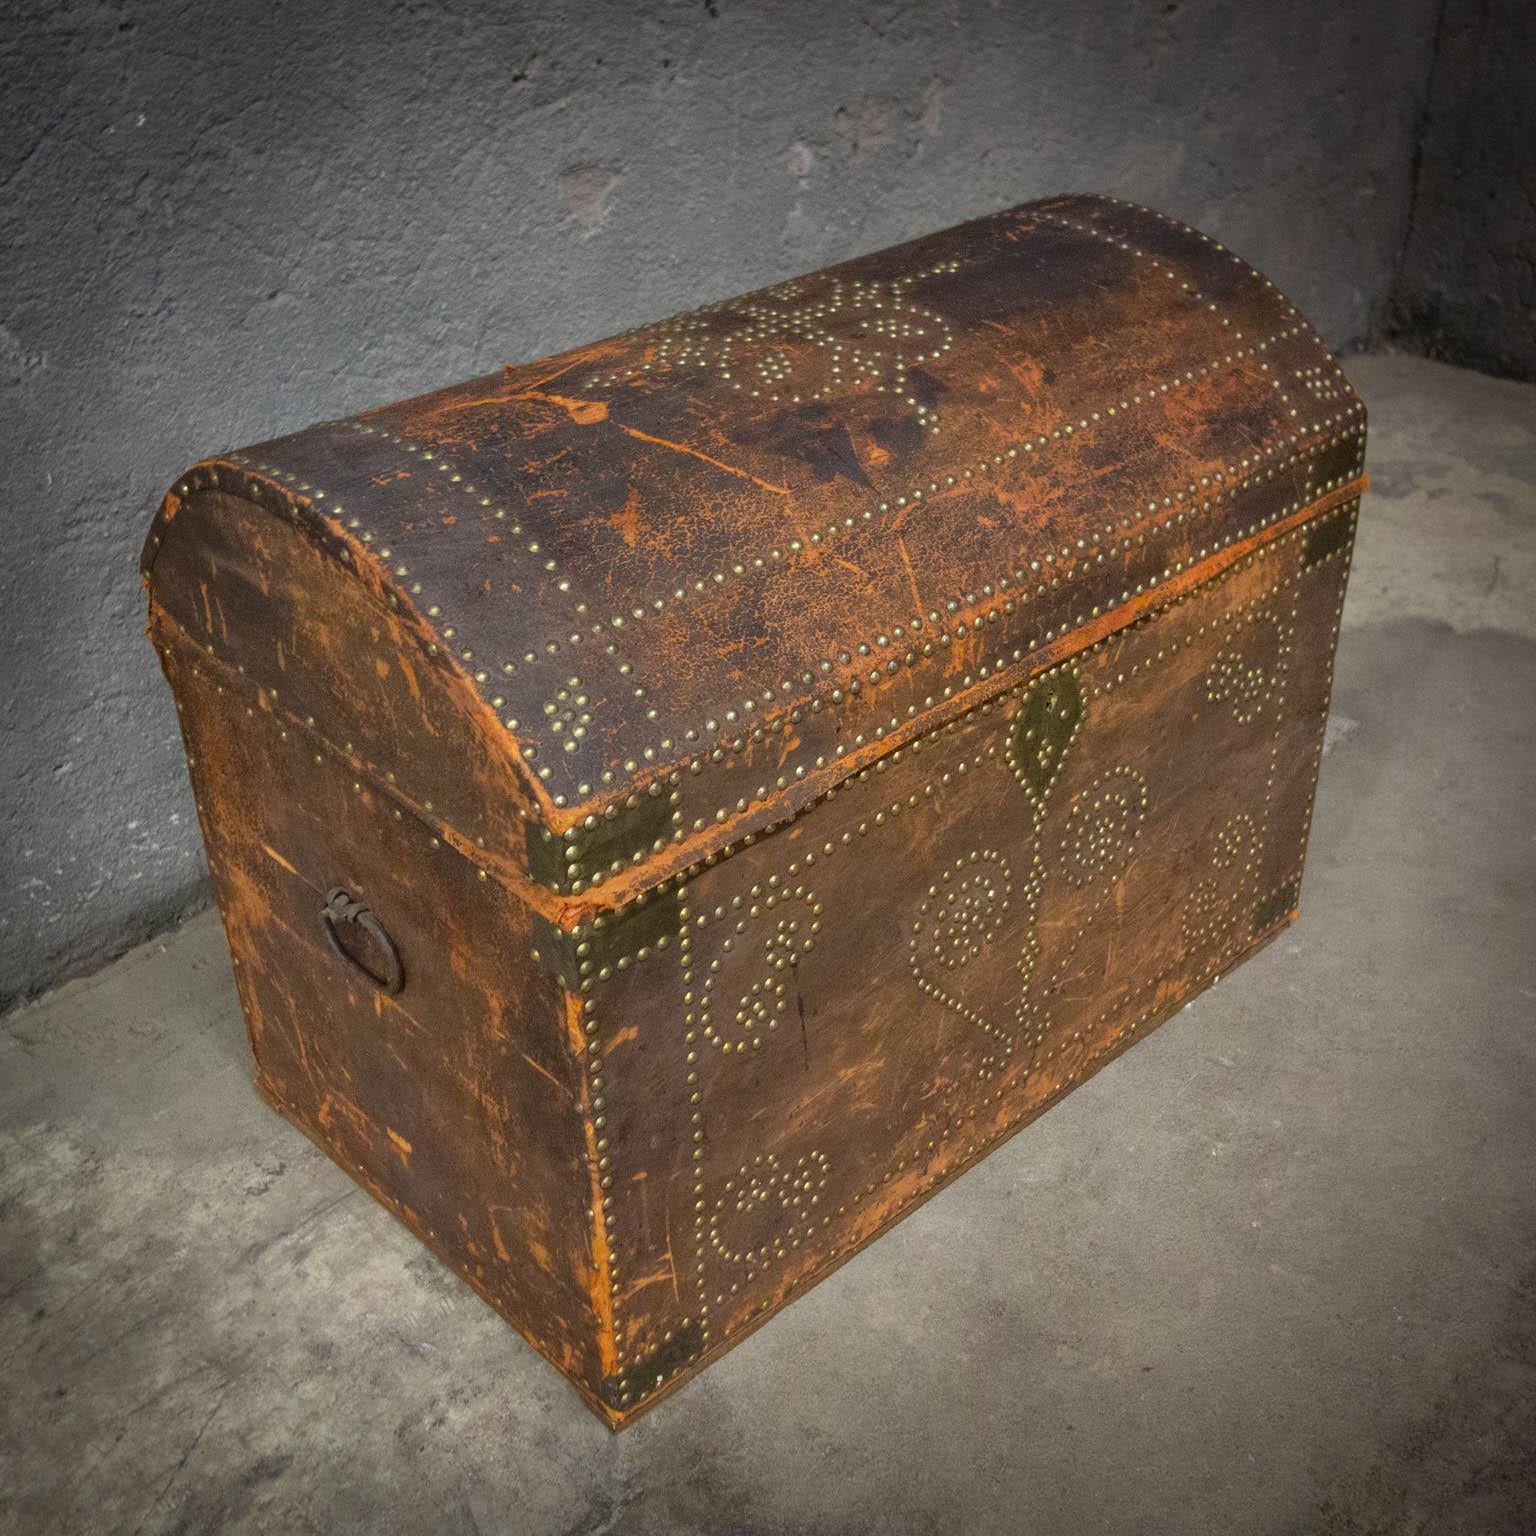 What a beauty! When we came across this authentic leather wedding box, he had to come along. The case is approximately 200 years old, it is made of leather to keep it watertight. This chest is beautifully decorated with a big heart at the front. The